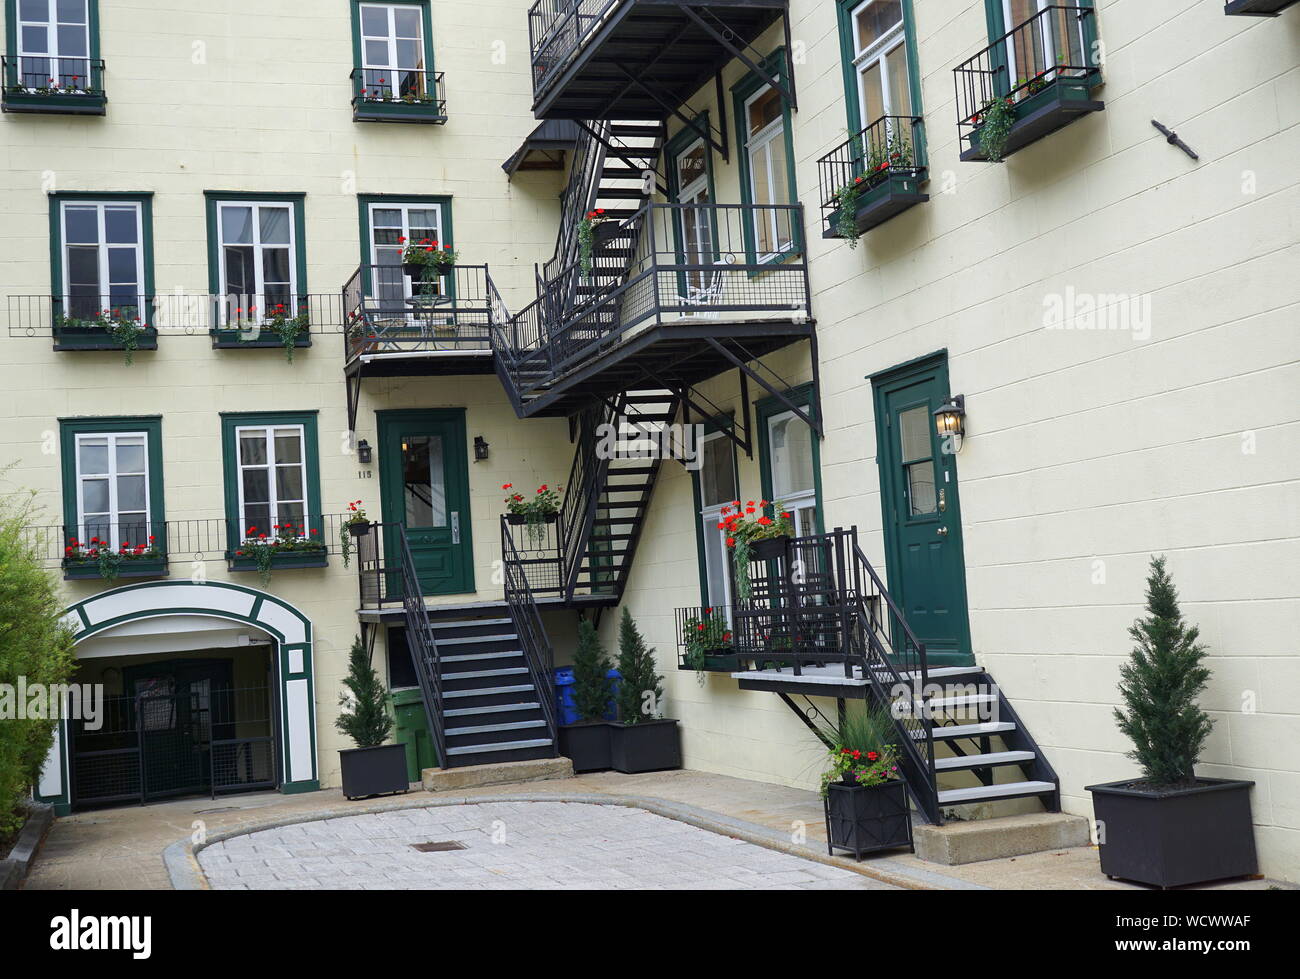 Urban garden, plants and flowers hanging on windowsills, Old Quebec City, Canada Stock Photo